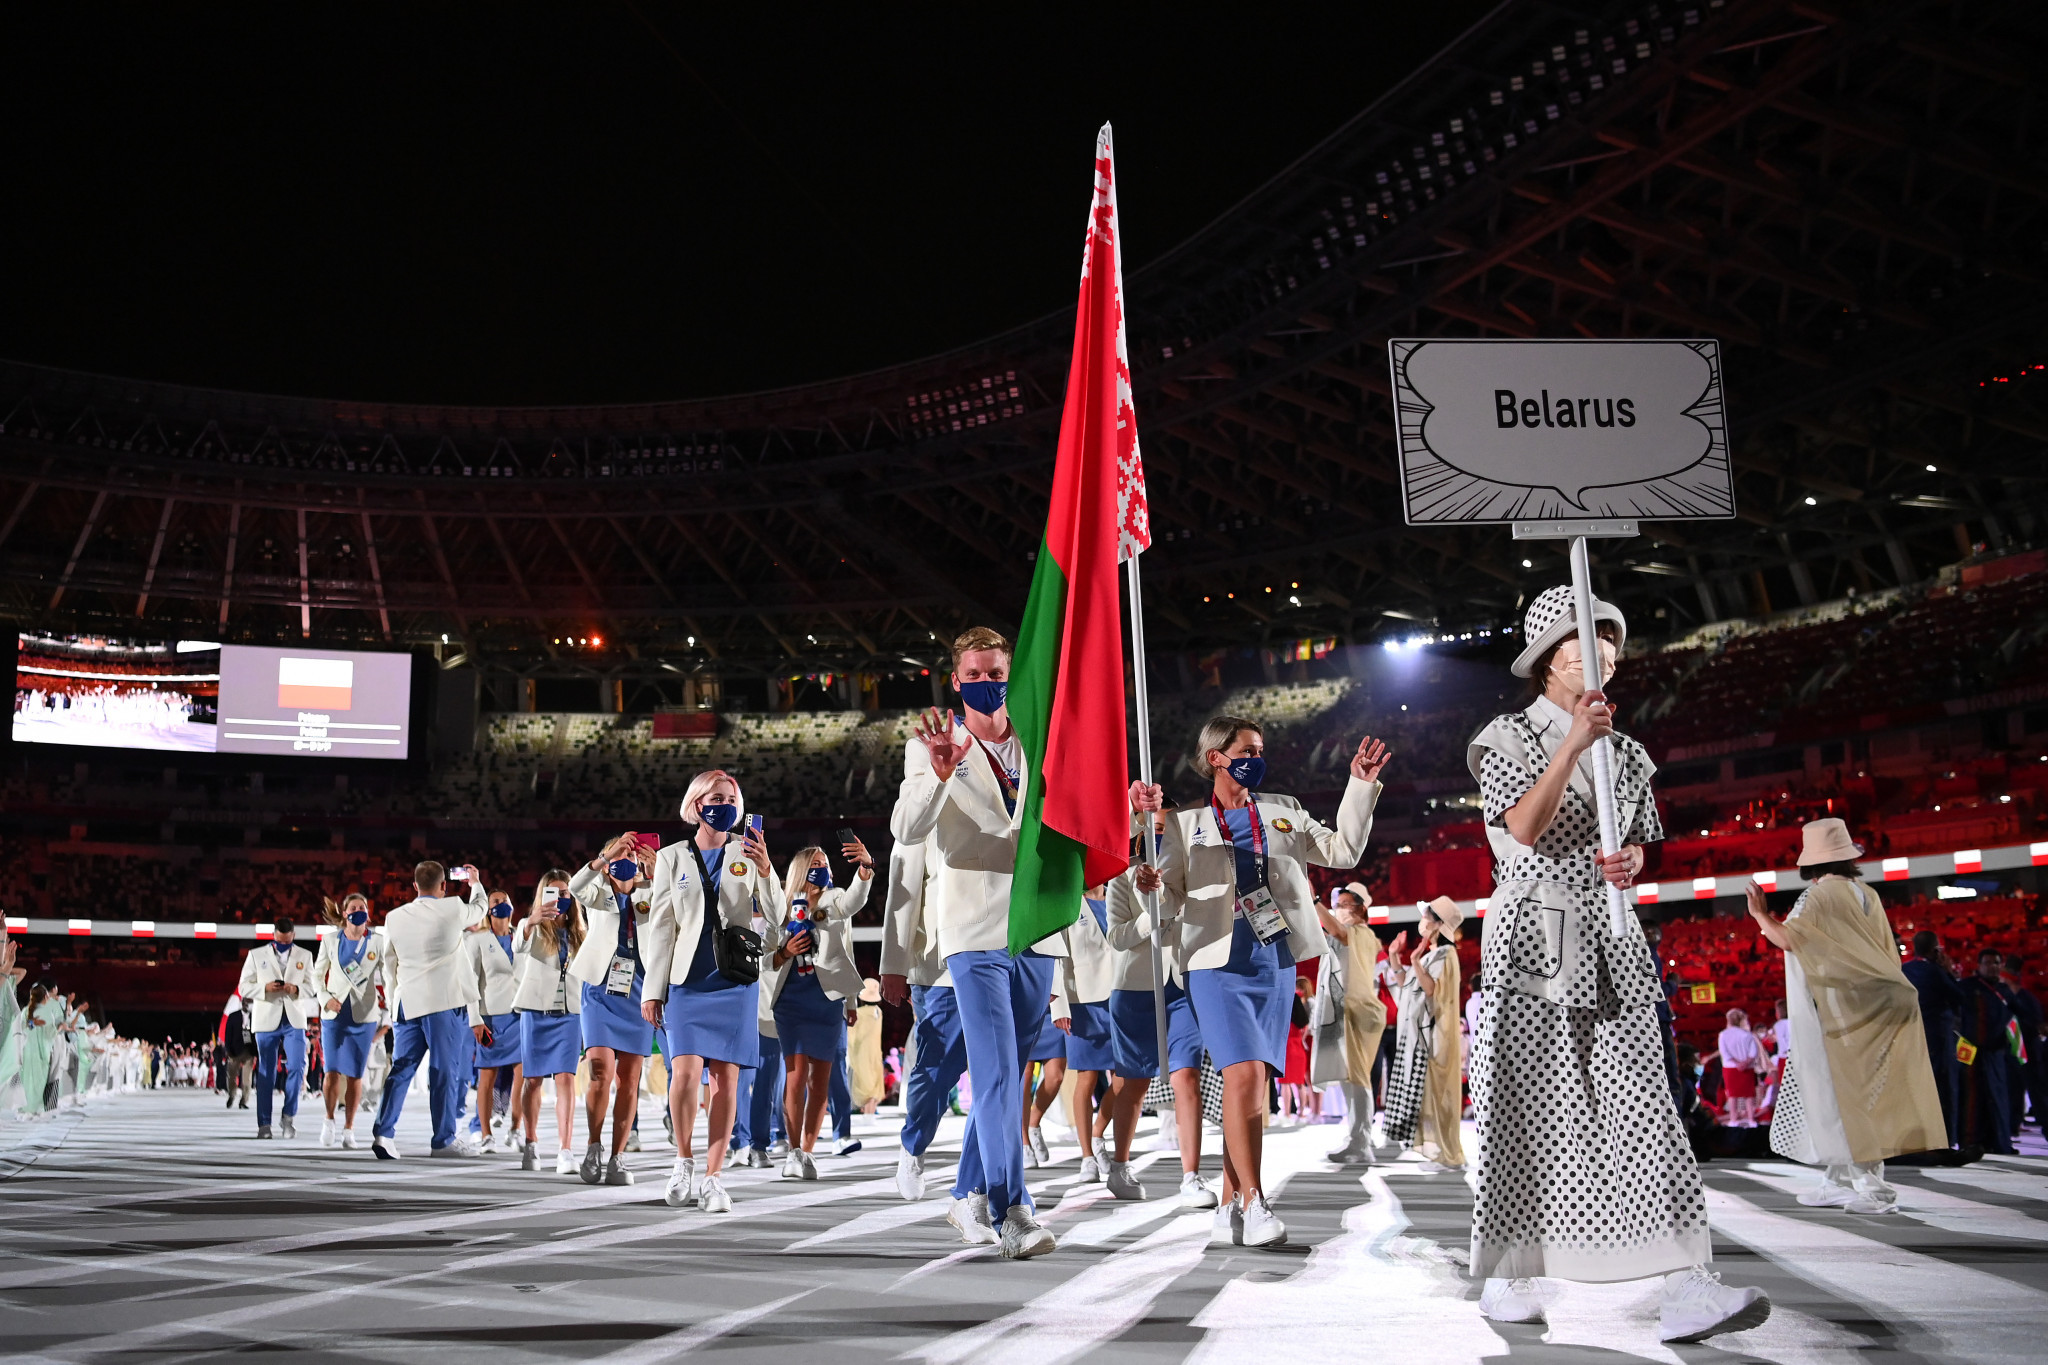 Dissident Belarusian athletes have criticised the IOC's hopes for Russian and Belarusian athletes to compete as neutrals at Paris 2024, describing the criteria as 